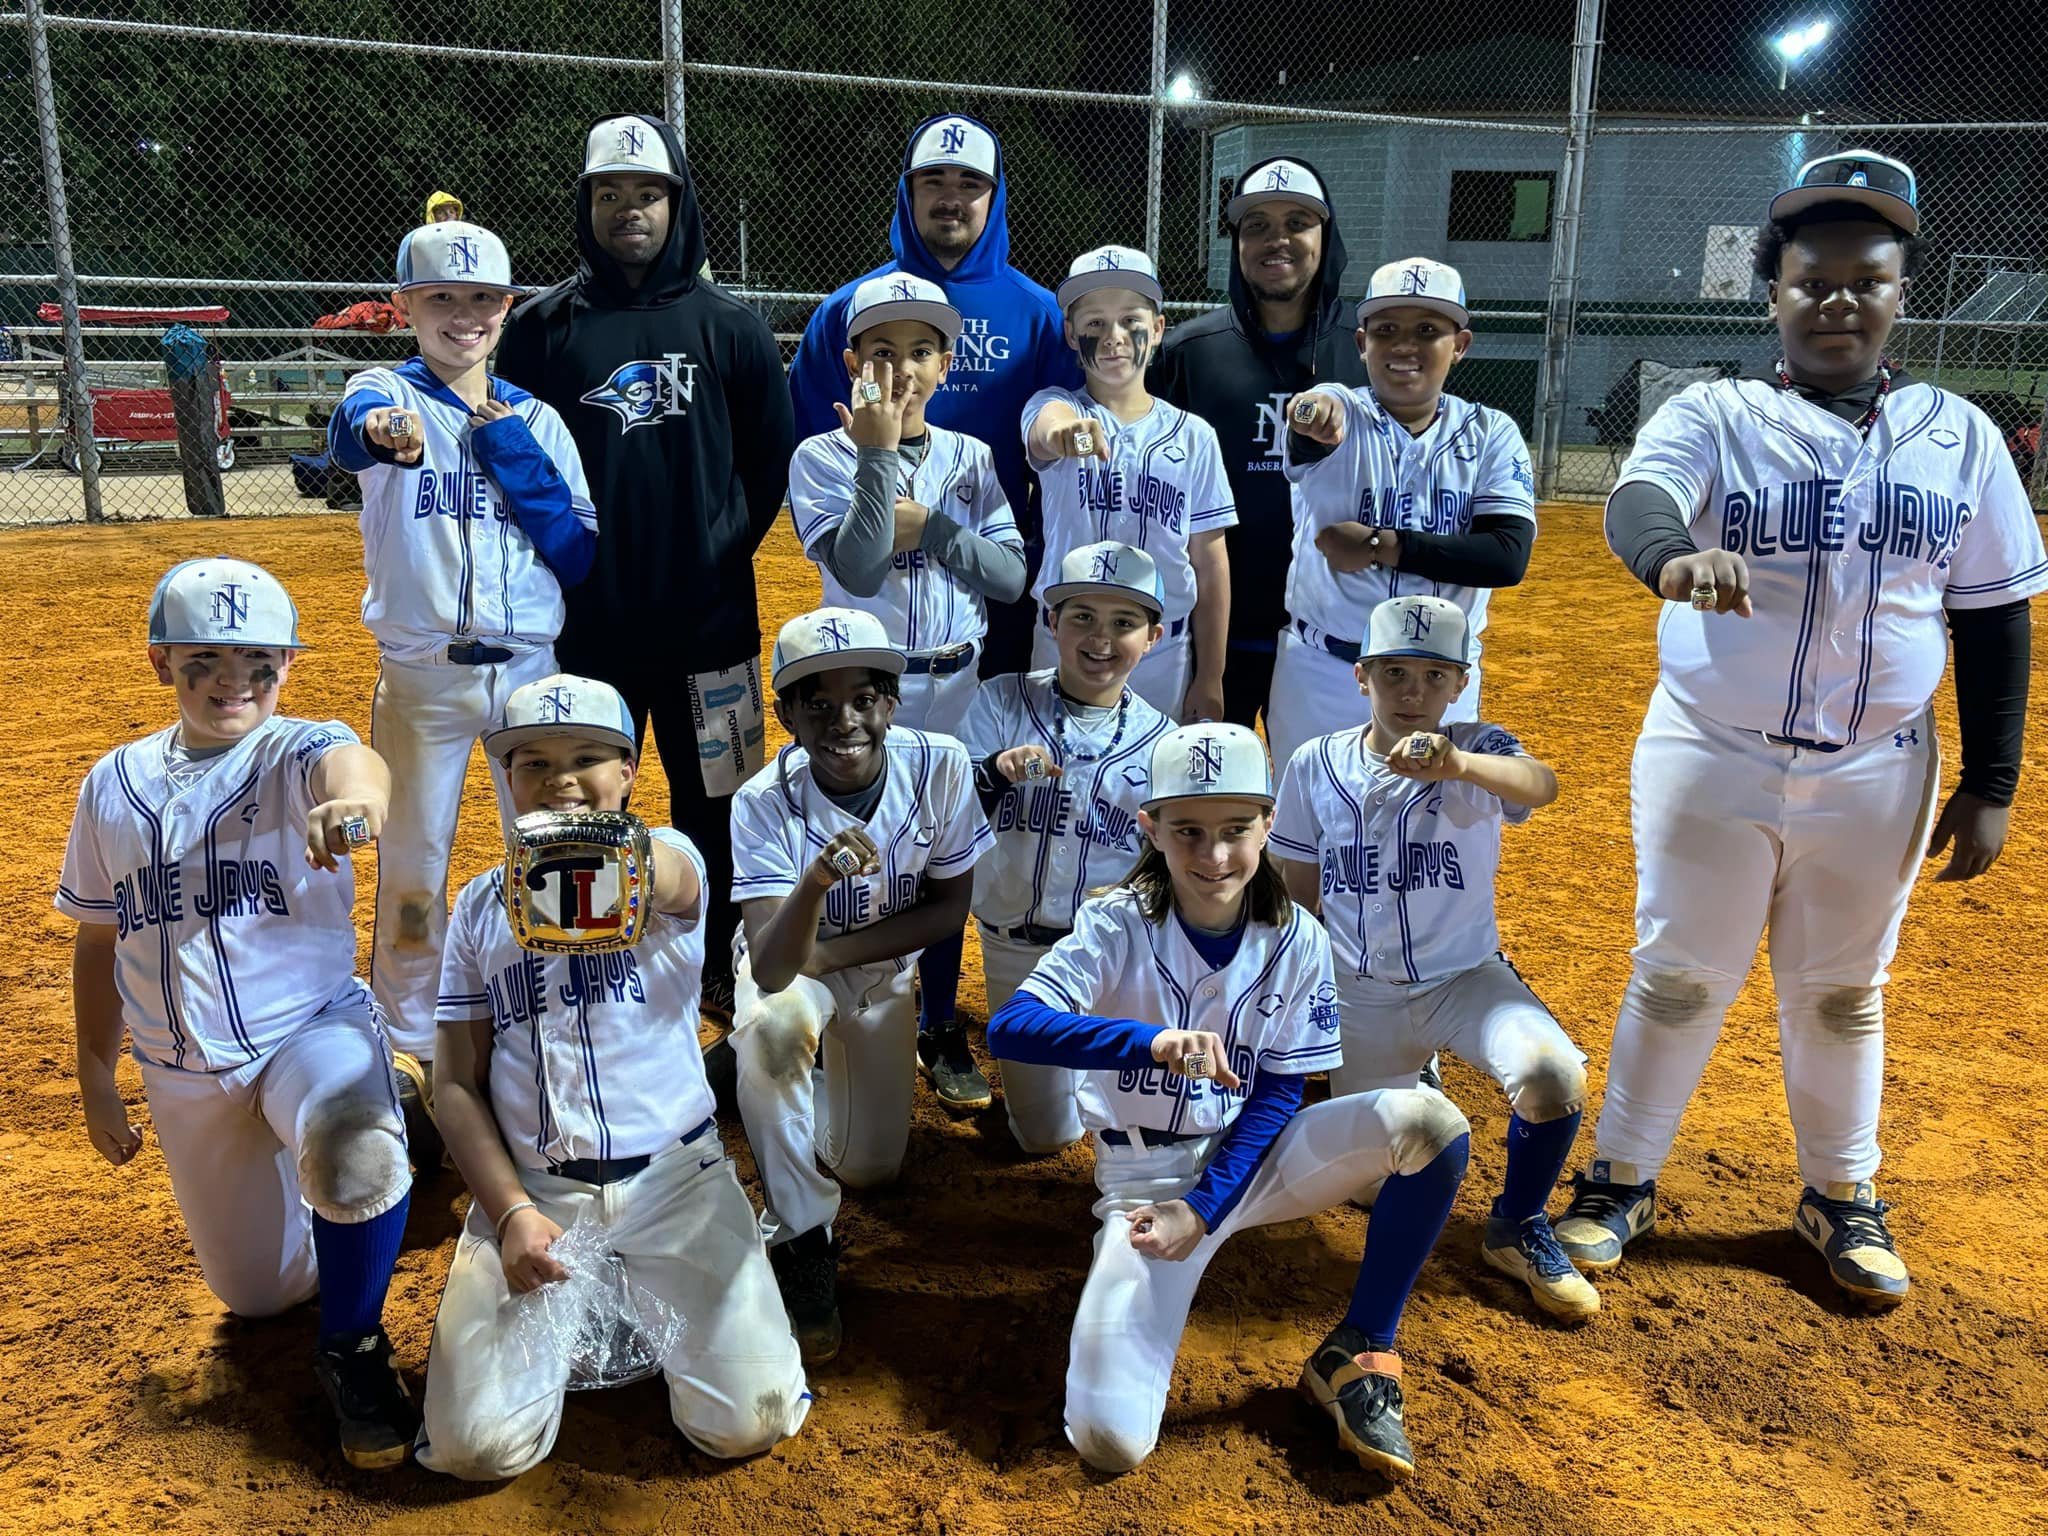 Congratulations to the 11u Blue Jays Sprull ok a 4-0 weekend. The 11u Blue Jays won the Training Legends win the rings tournament. Go Blue Jays!